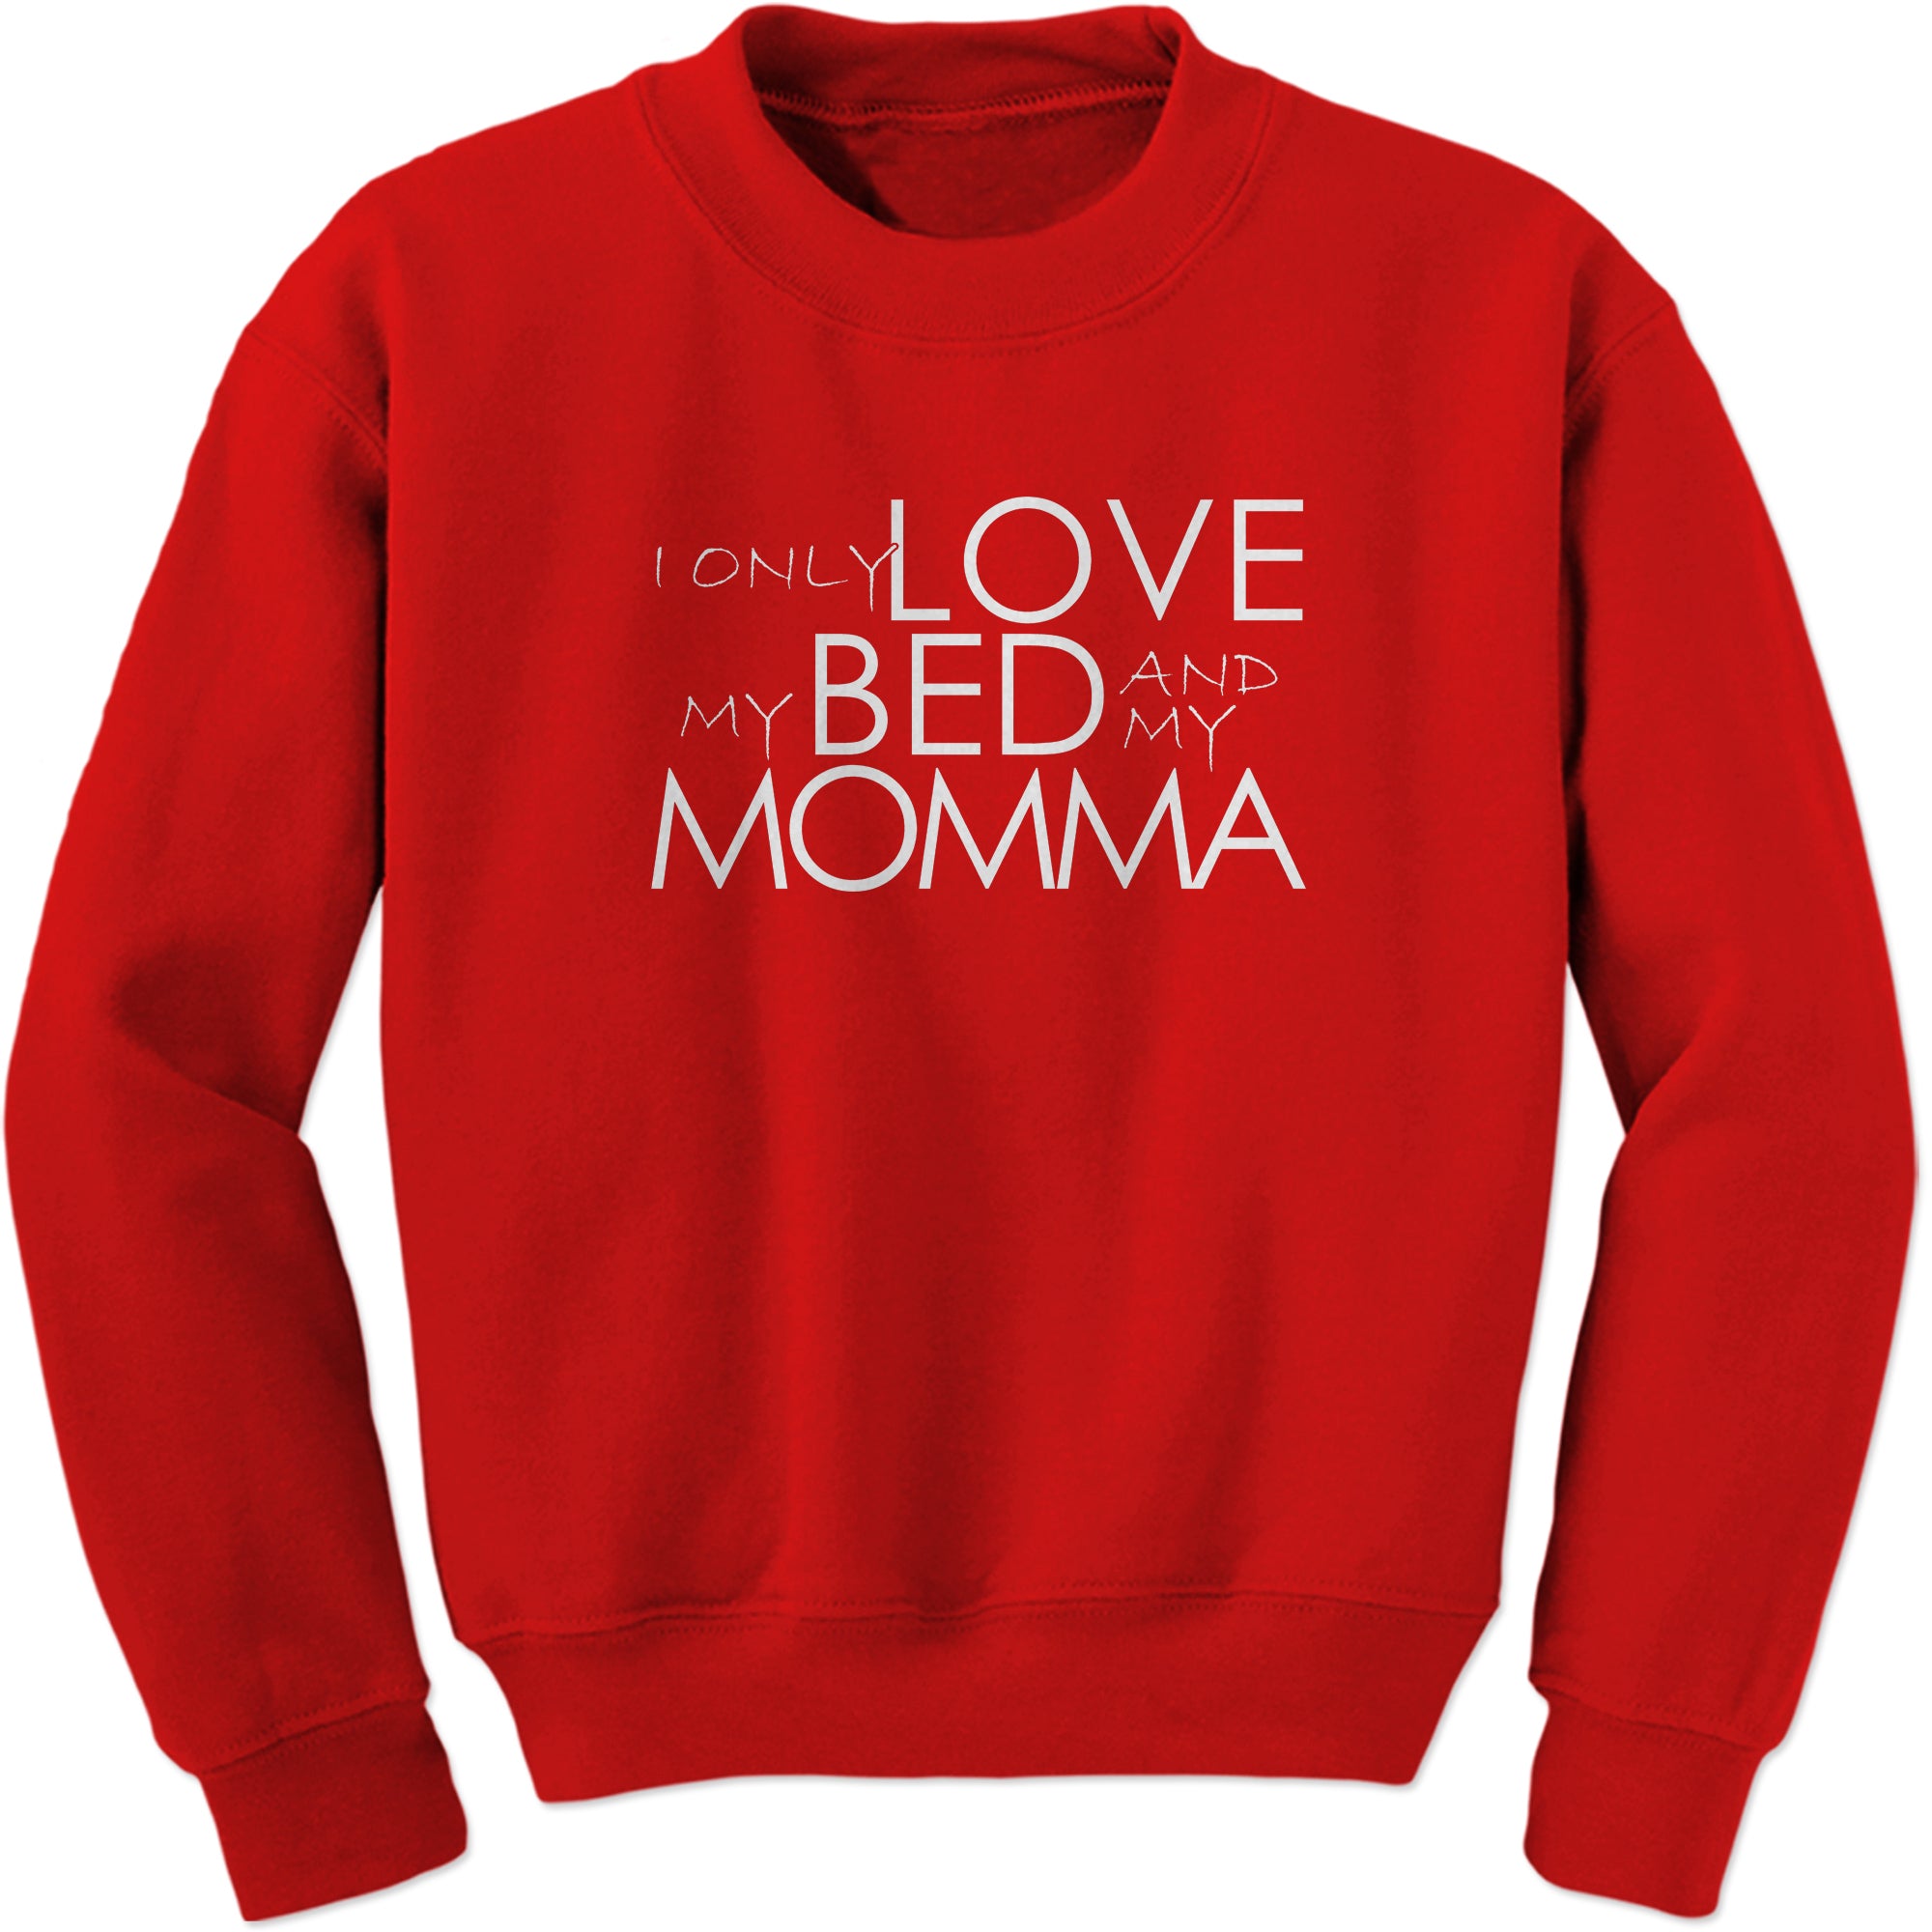 I Only Love My Bed And My Momma Sweatshirt